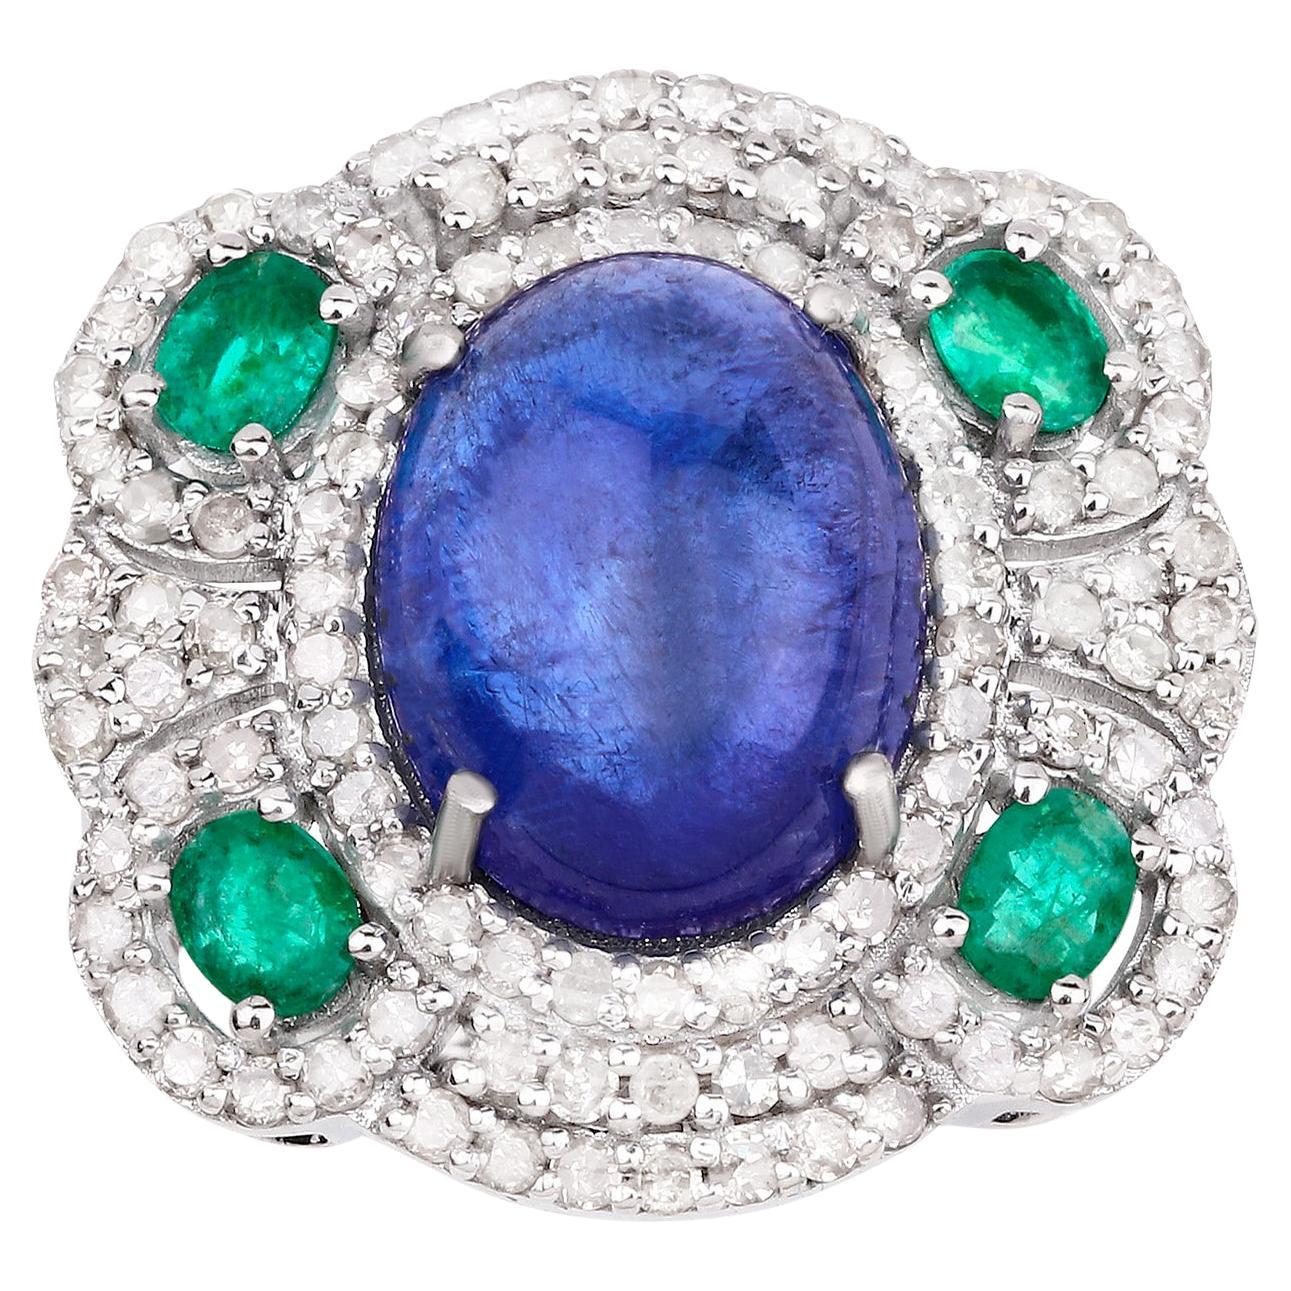 Cabochon Tanzanite Ring With Emeralds and Diamonds 9.44 Carats Sterling Silver